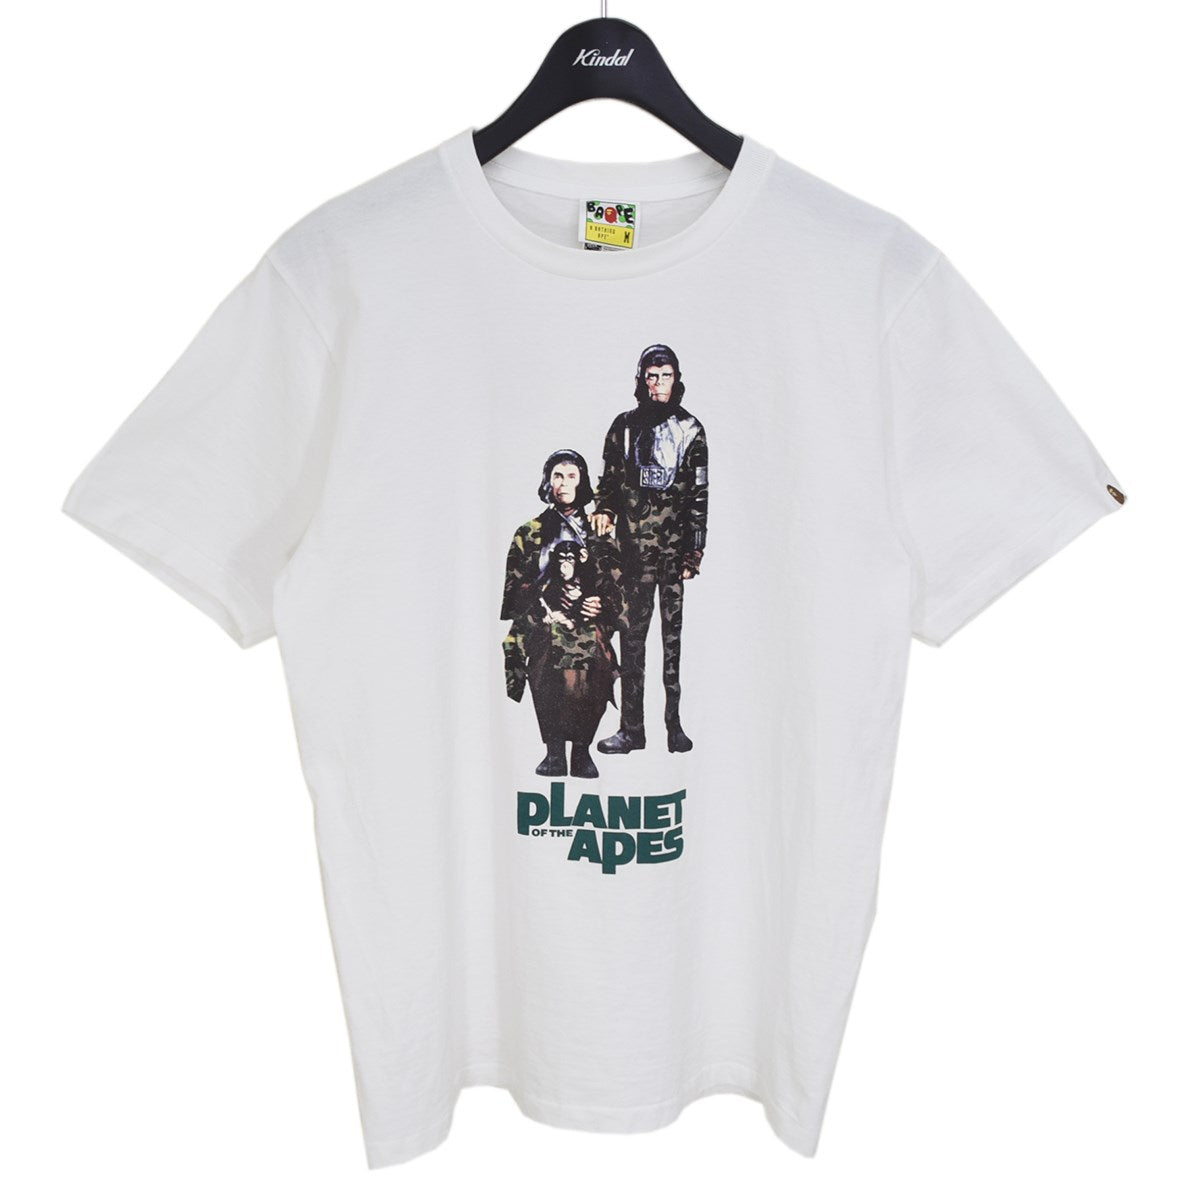 A BATHING APE(アベイシングエイプ) A PLANET OF THE APES Tee 猿の ...